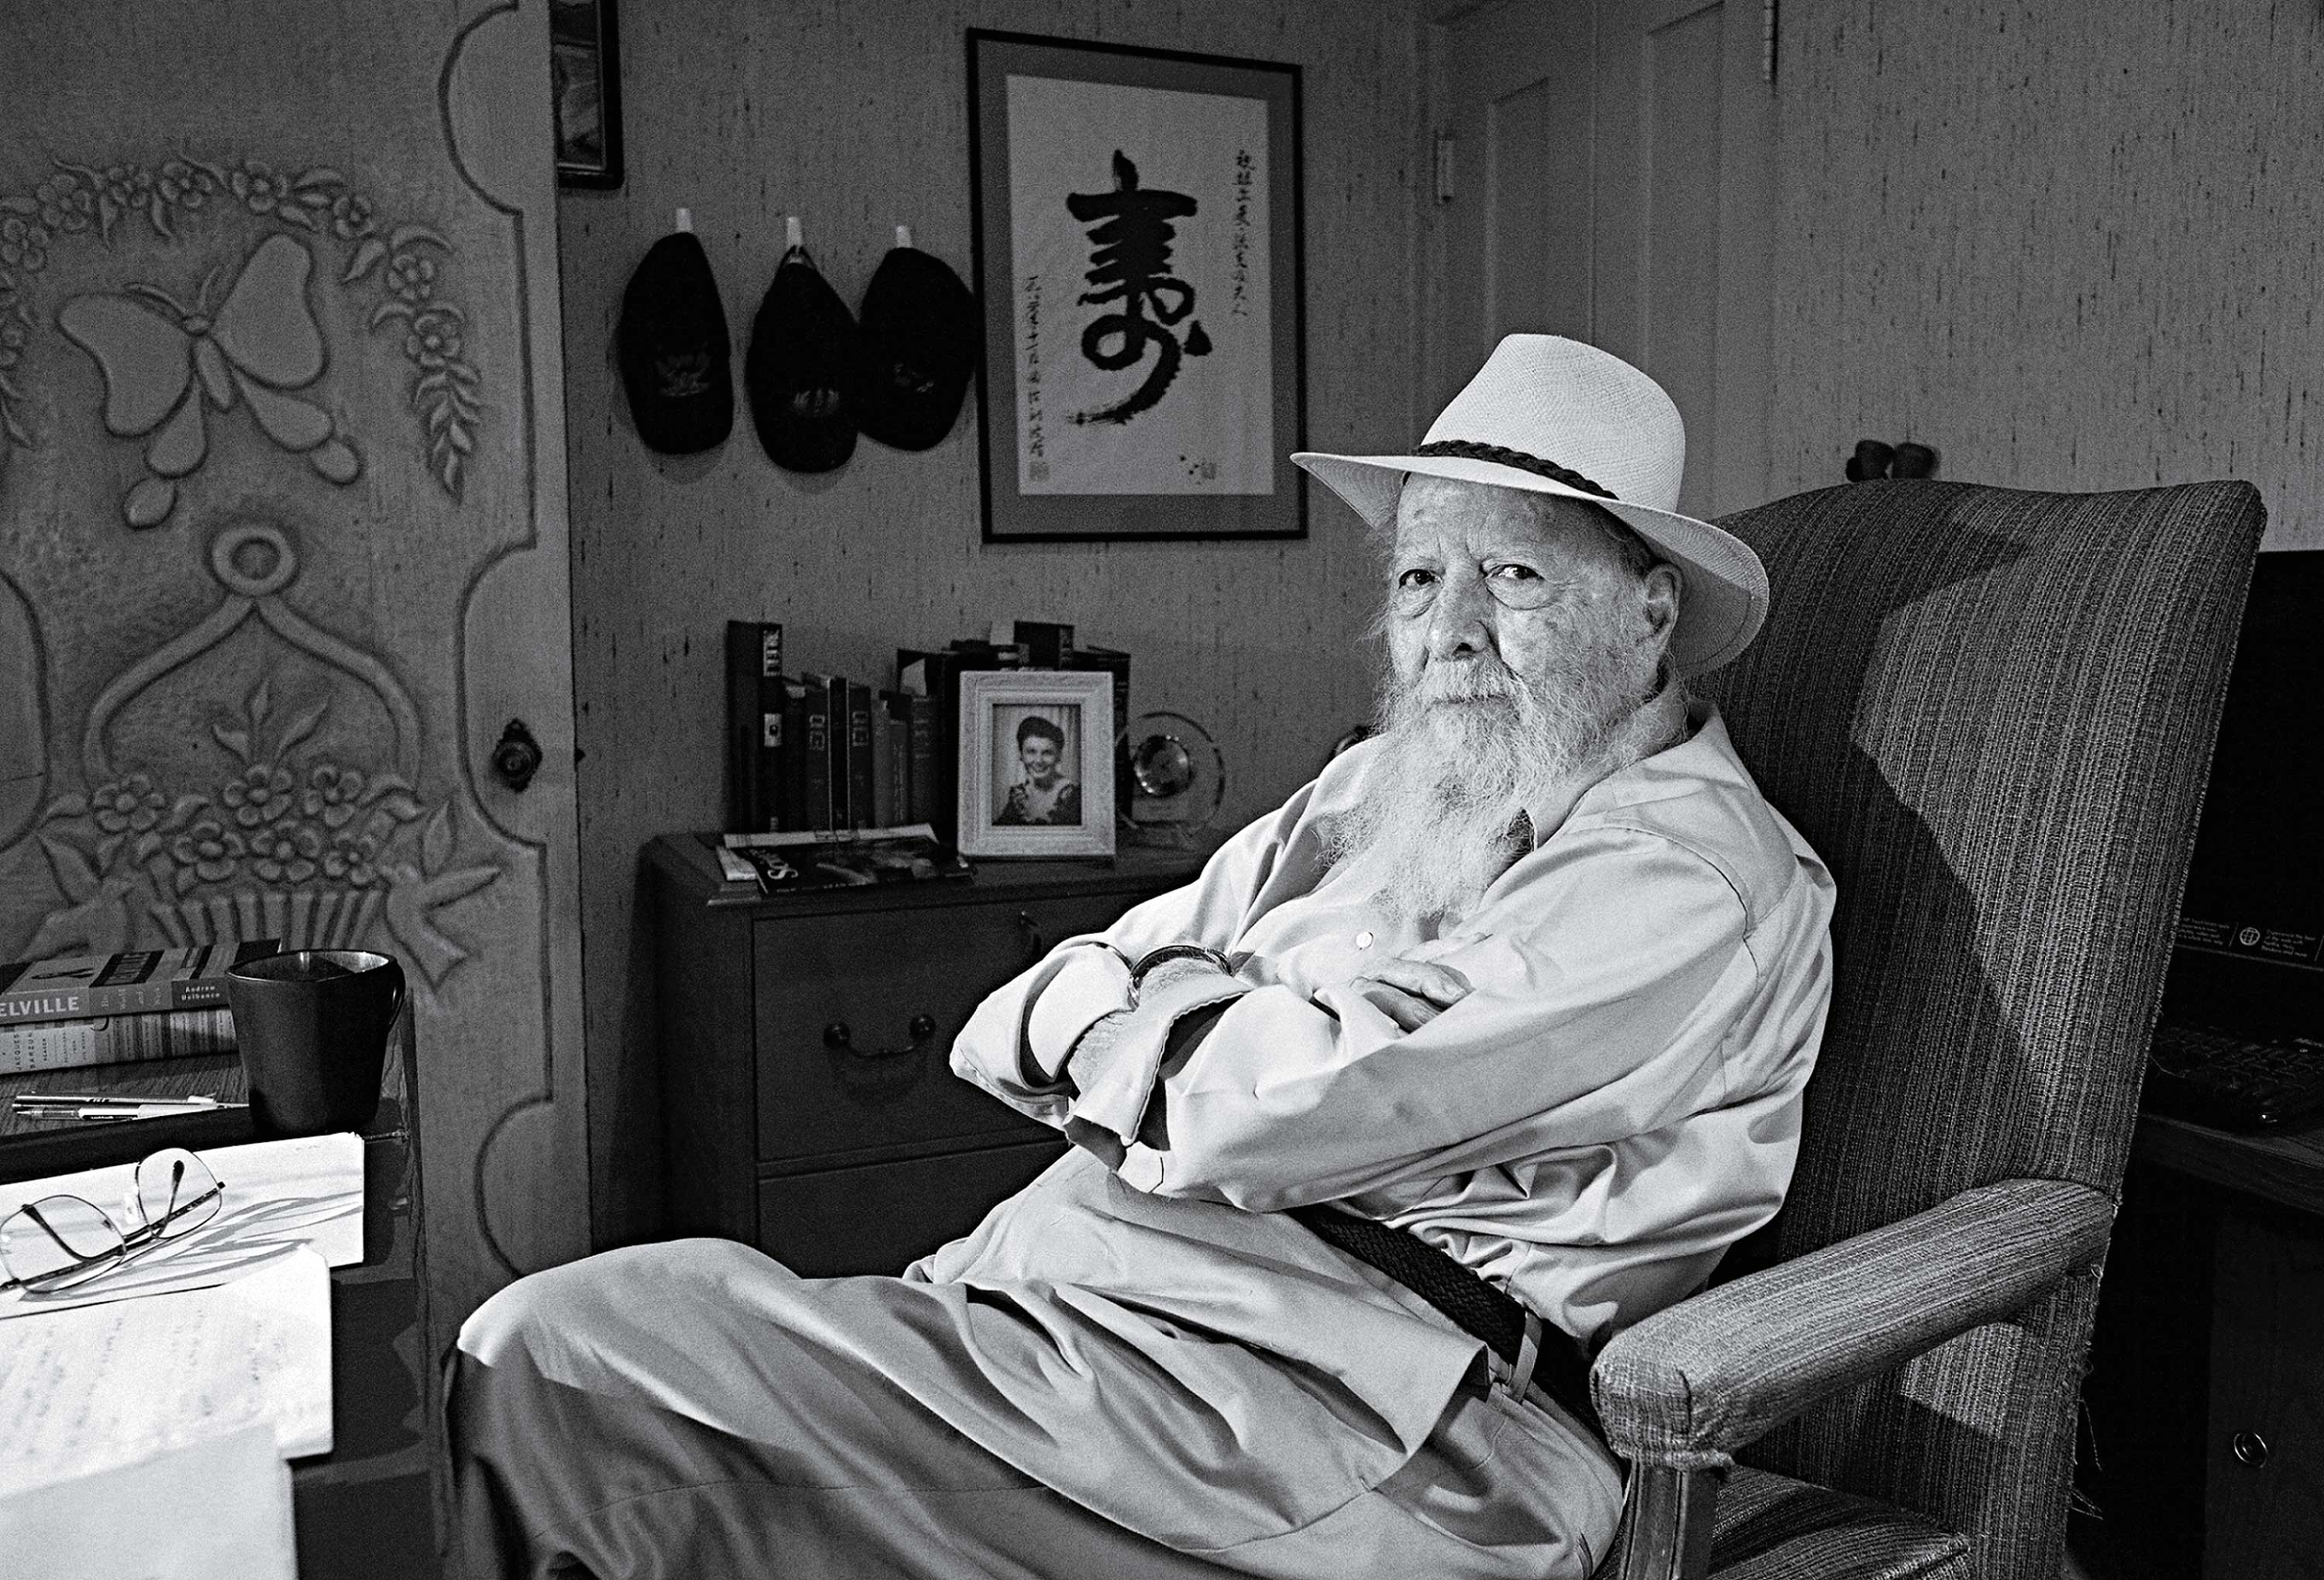 Herman Wouk The best-selling author of The Caine Mutiny and The Winds of War marks his 100th year on earth with a new memoir, Sailor and Fiddler (Stephanie Diani)